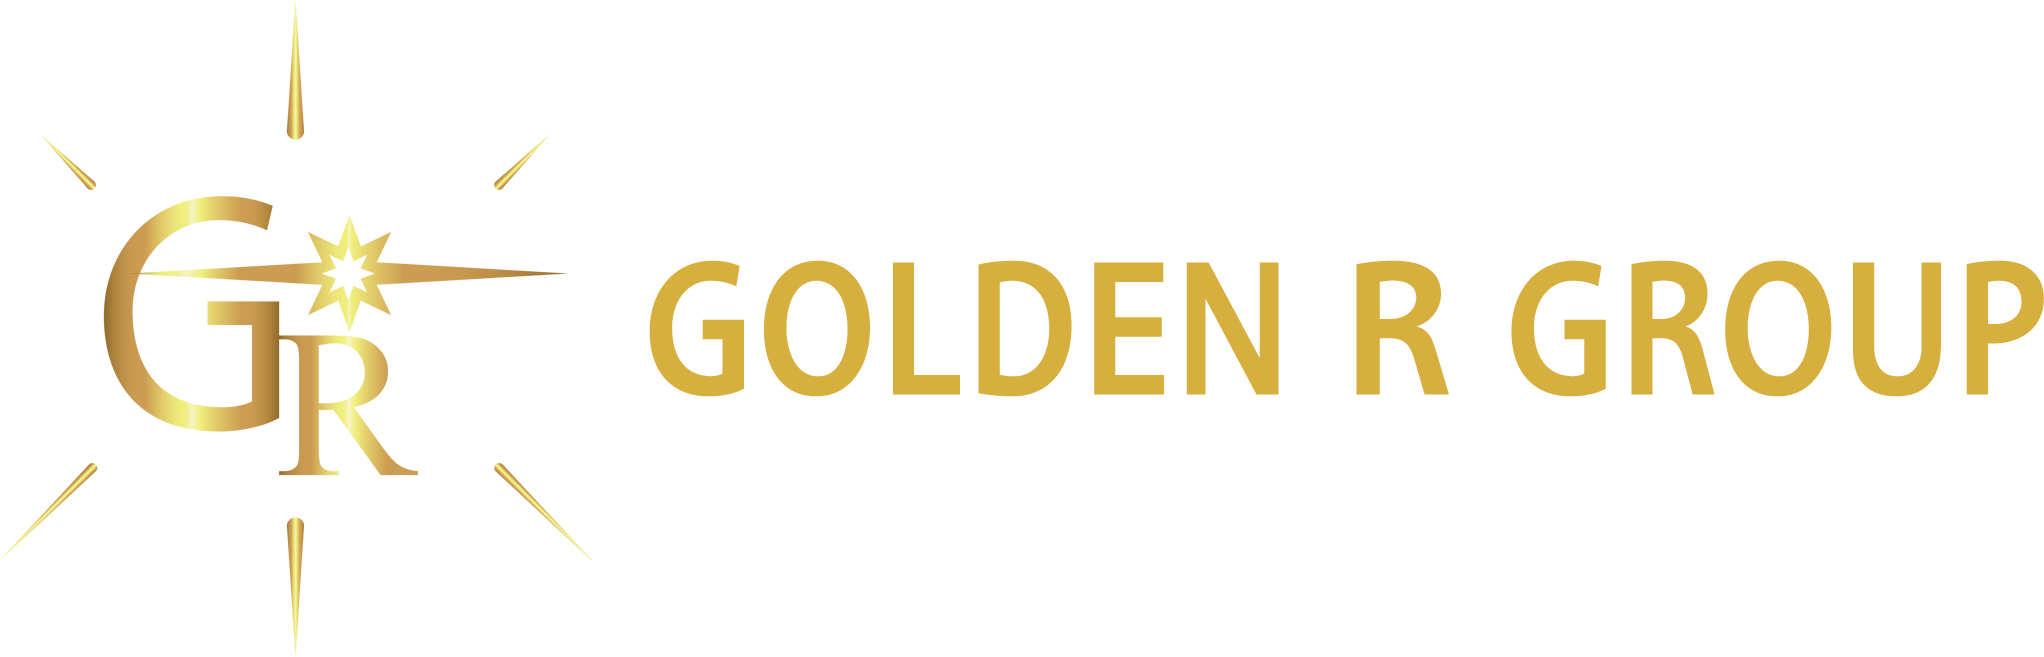 The Golden R Group